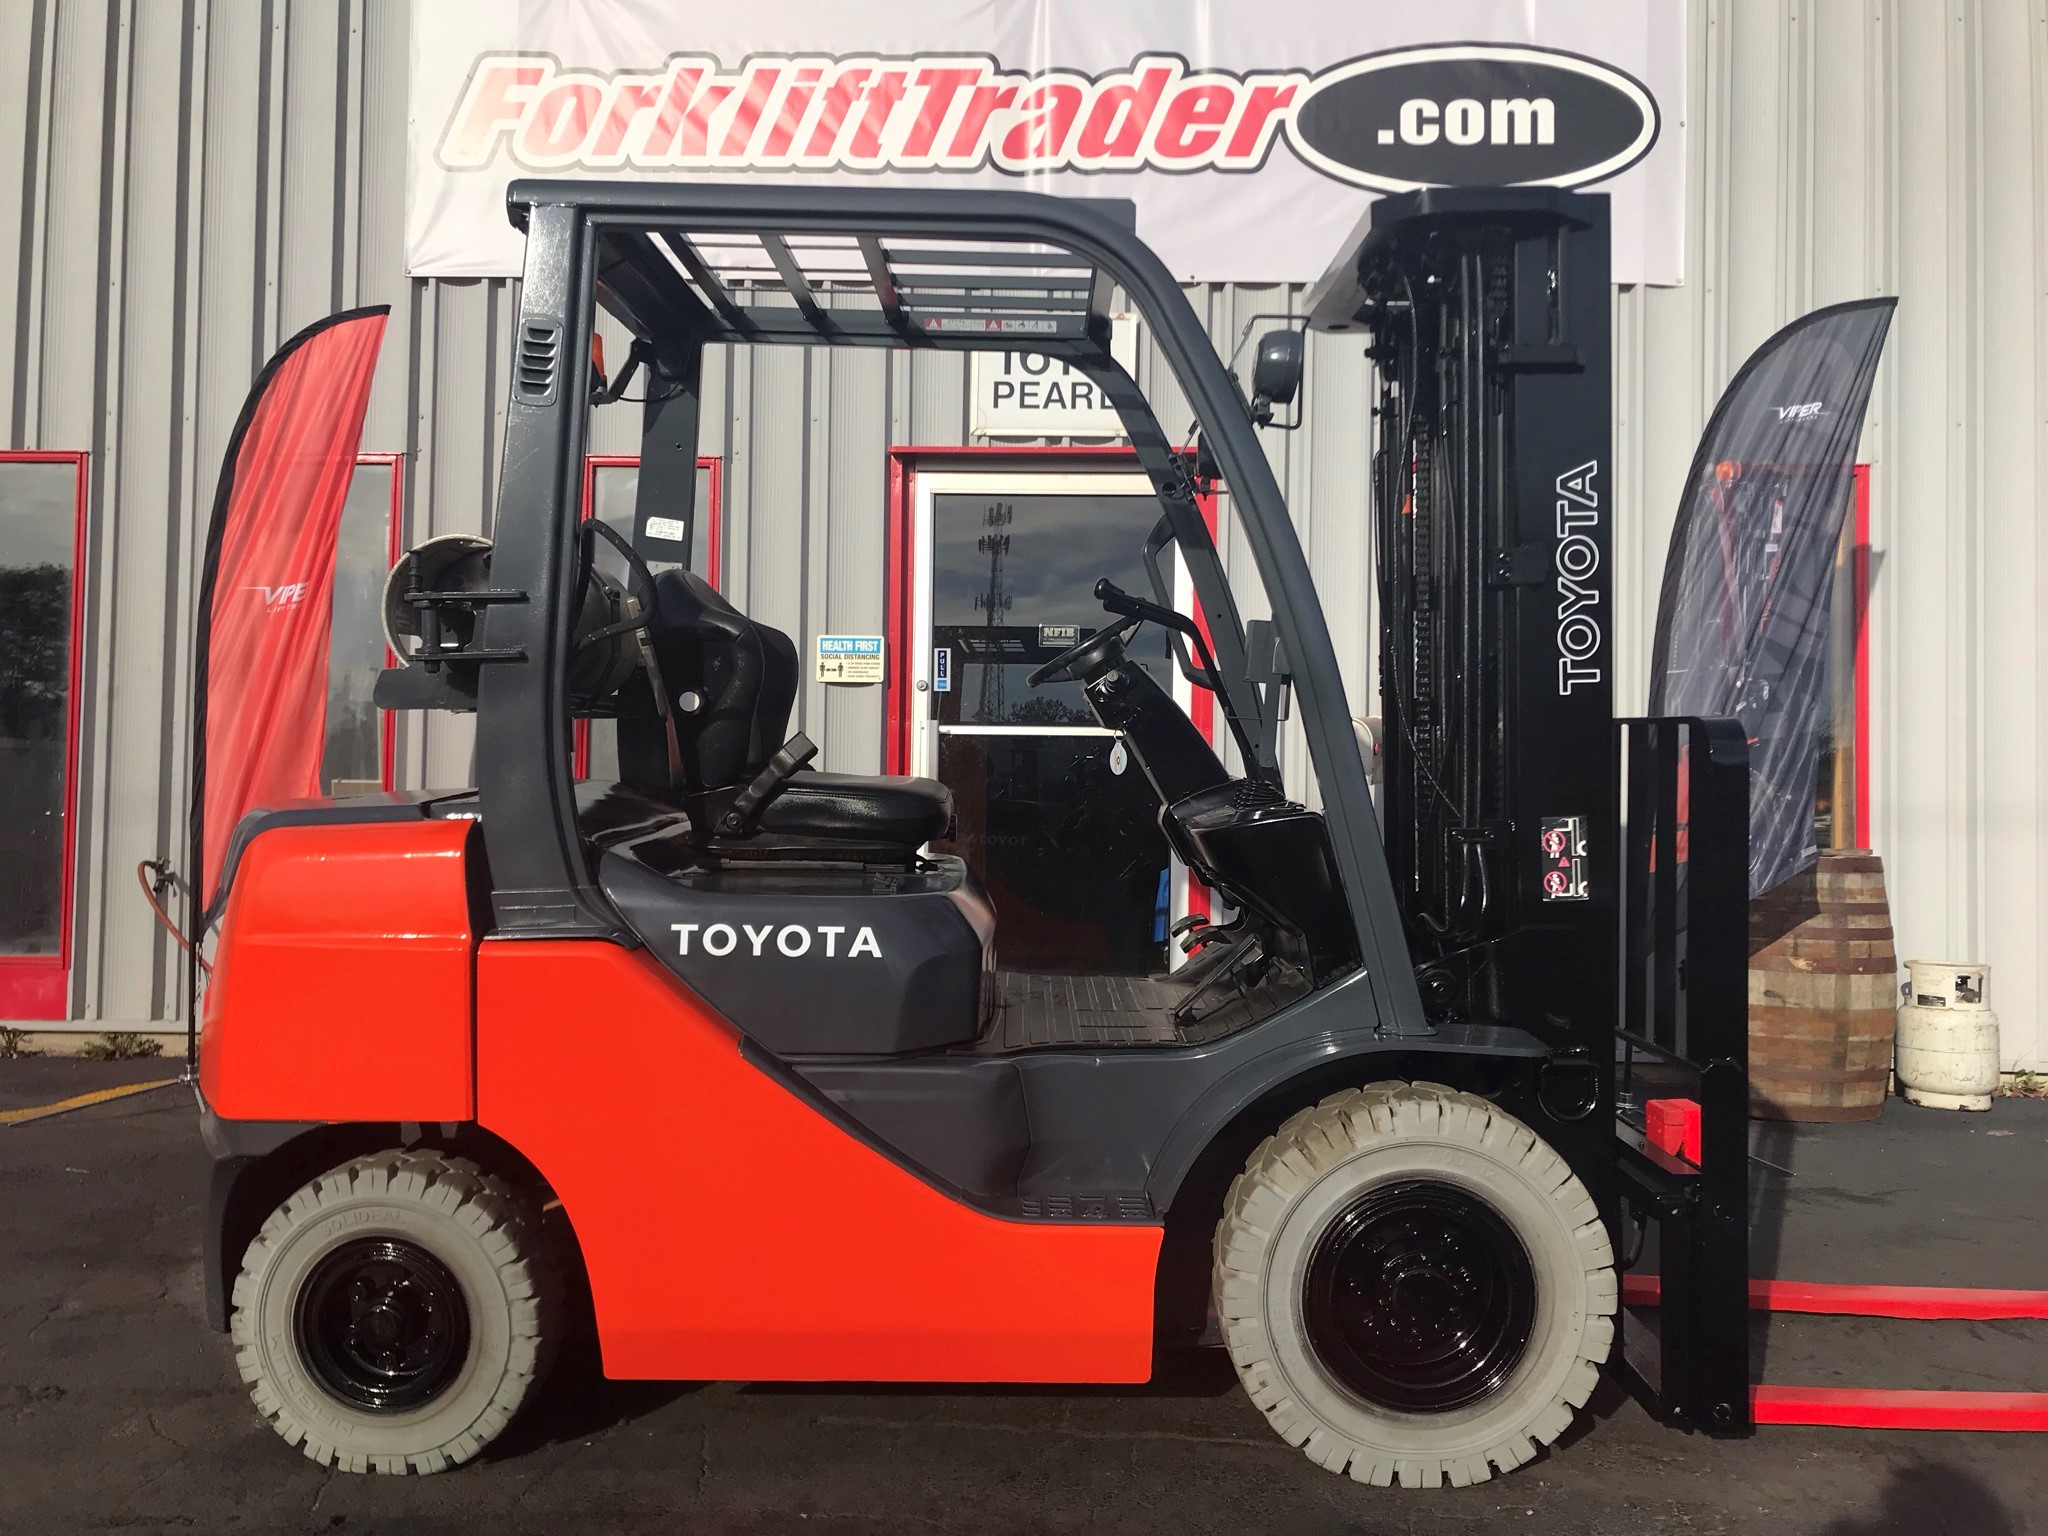 189" lift height 2014 toyota forklift for sale